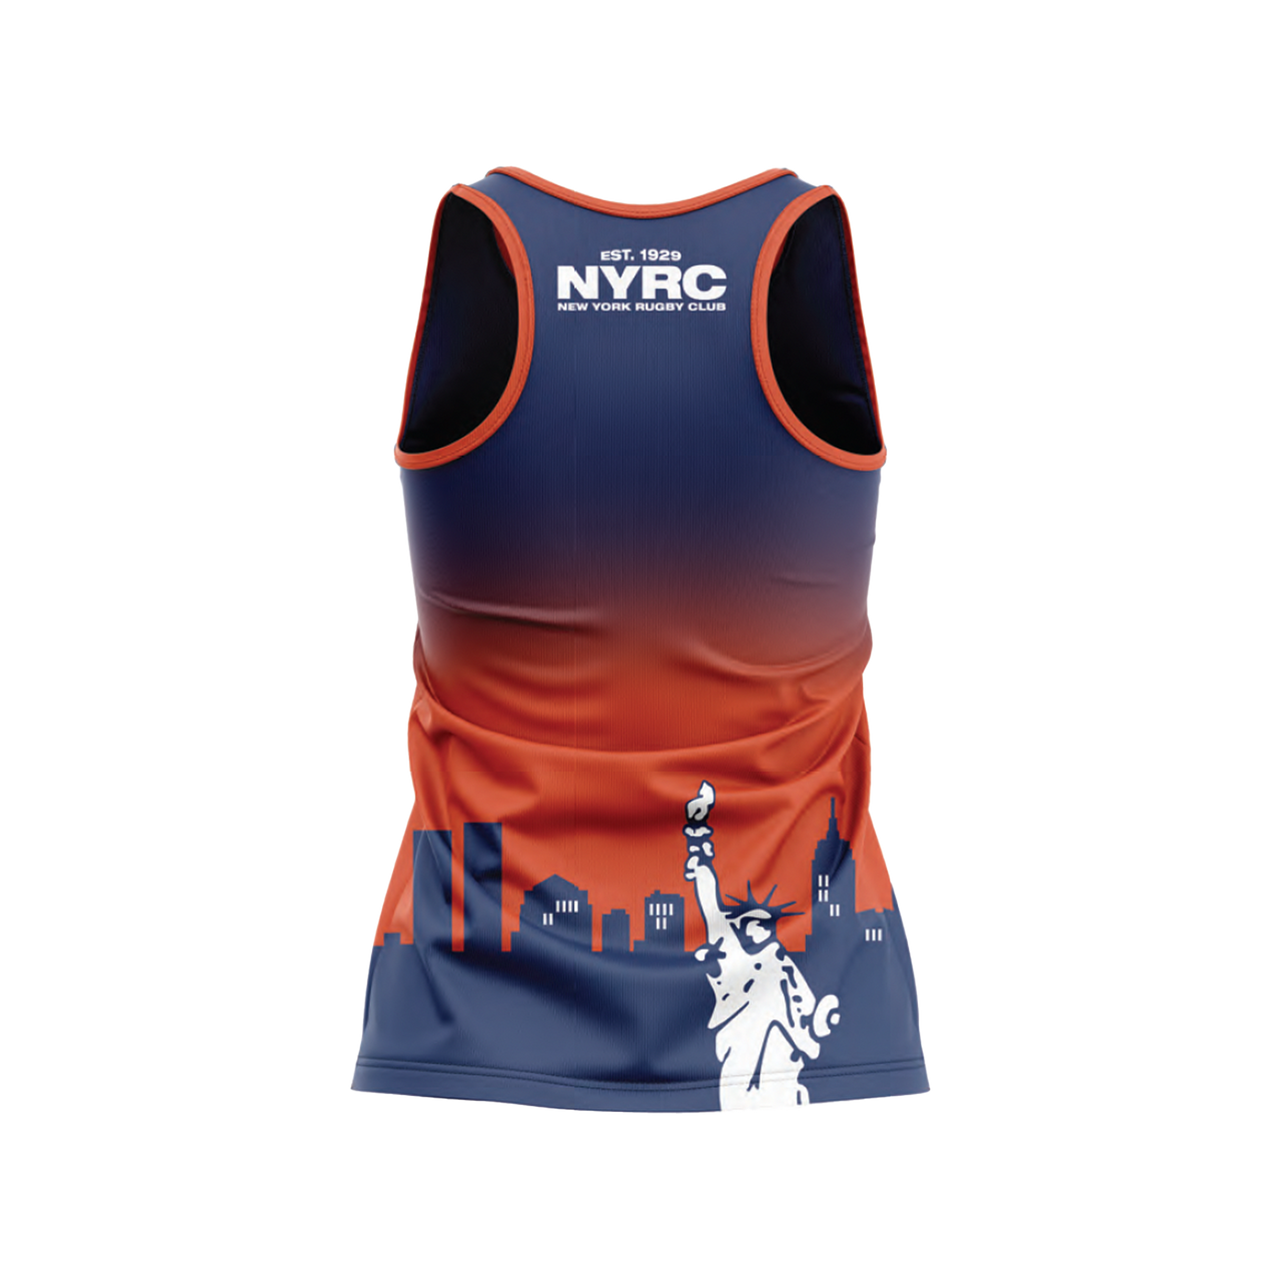 New York Rugby Womxn's Training Singlet